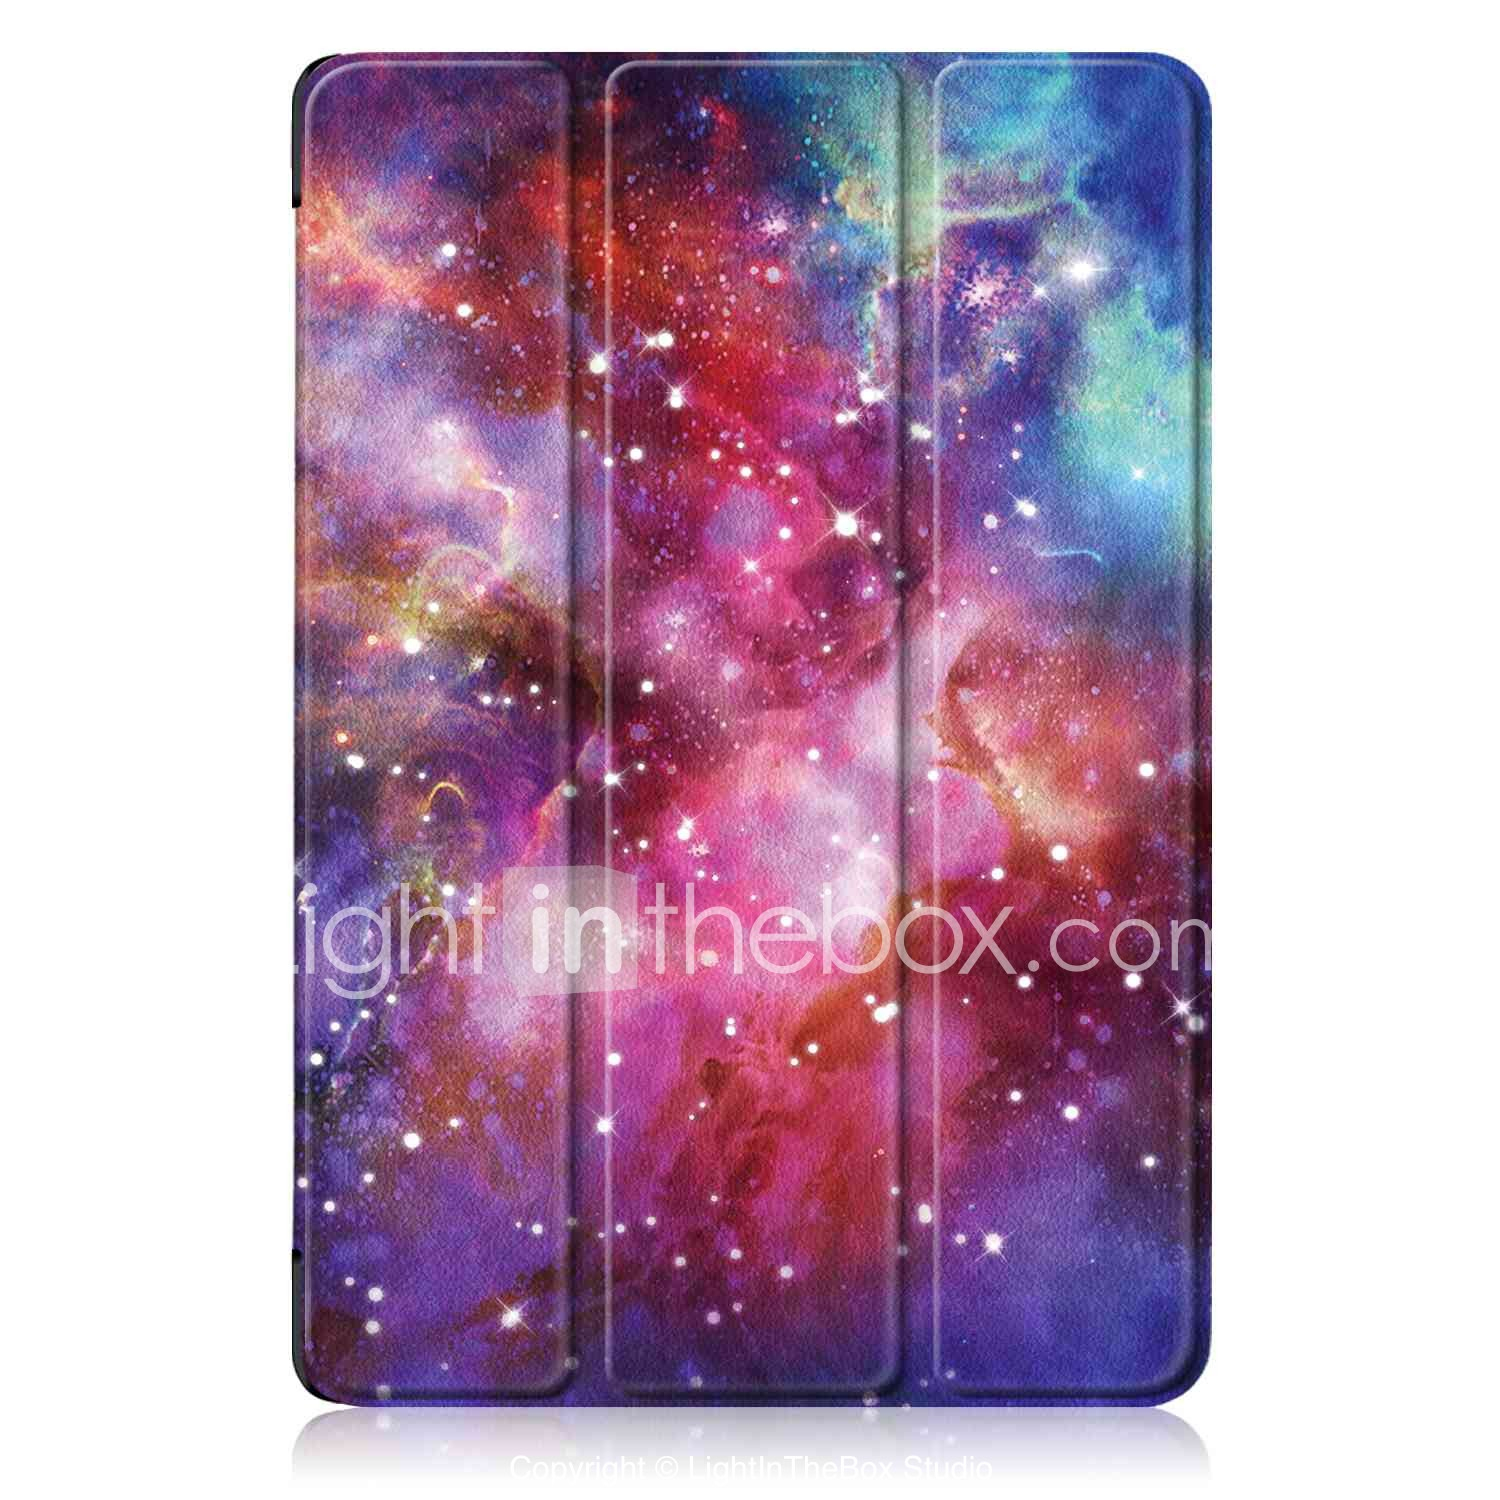 Origami Tablet Case Case For Huawei Mediapad Huawei Mediapad M5 10 Origami Magnetic